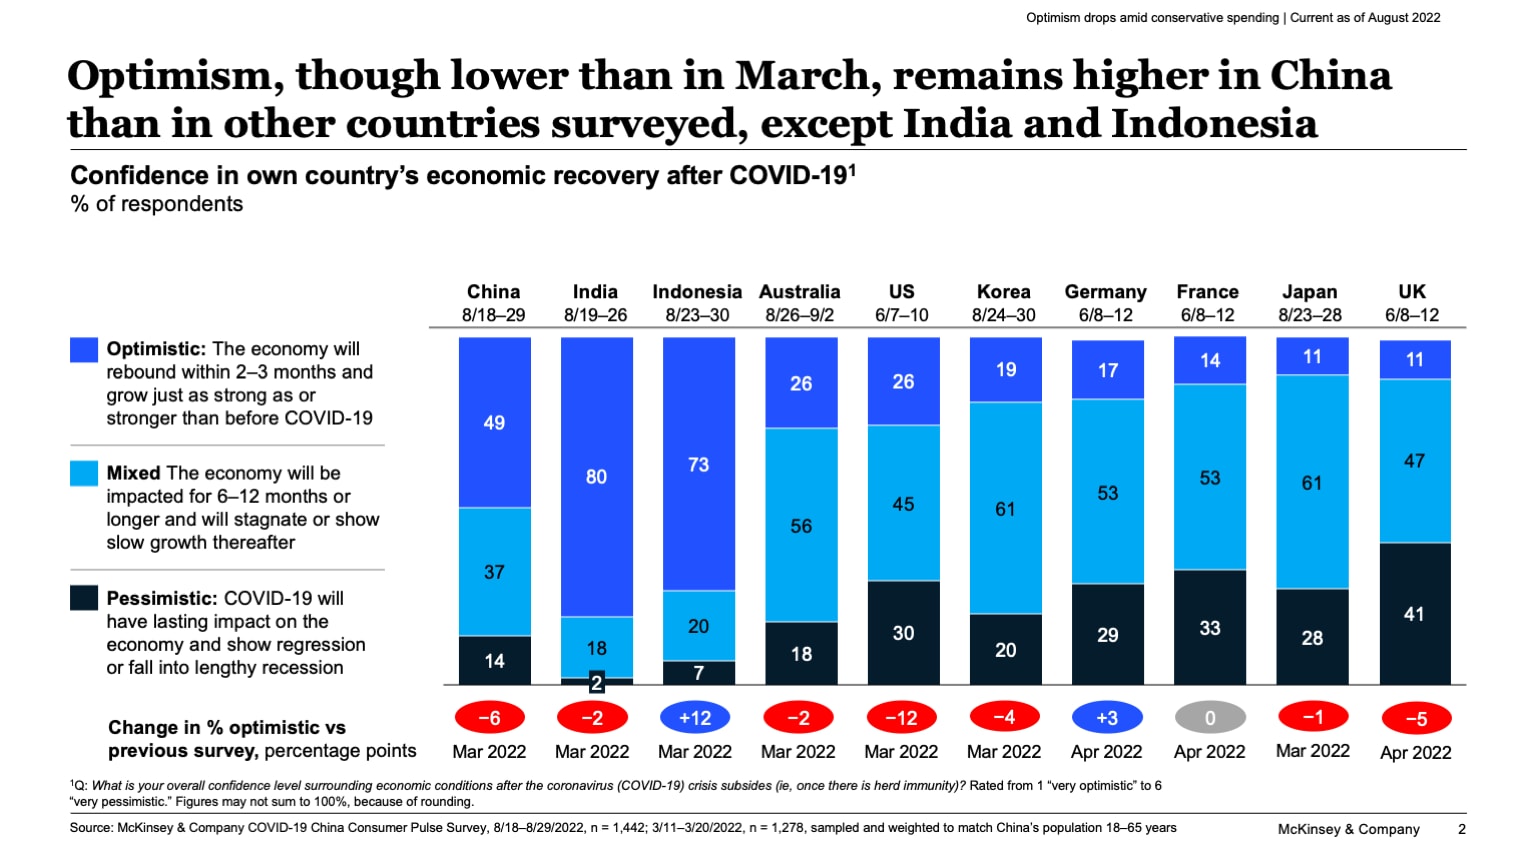 Optimism, though lower than in March, remains higher in China than in other countries surveyed, except India and Indonesia